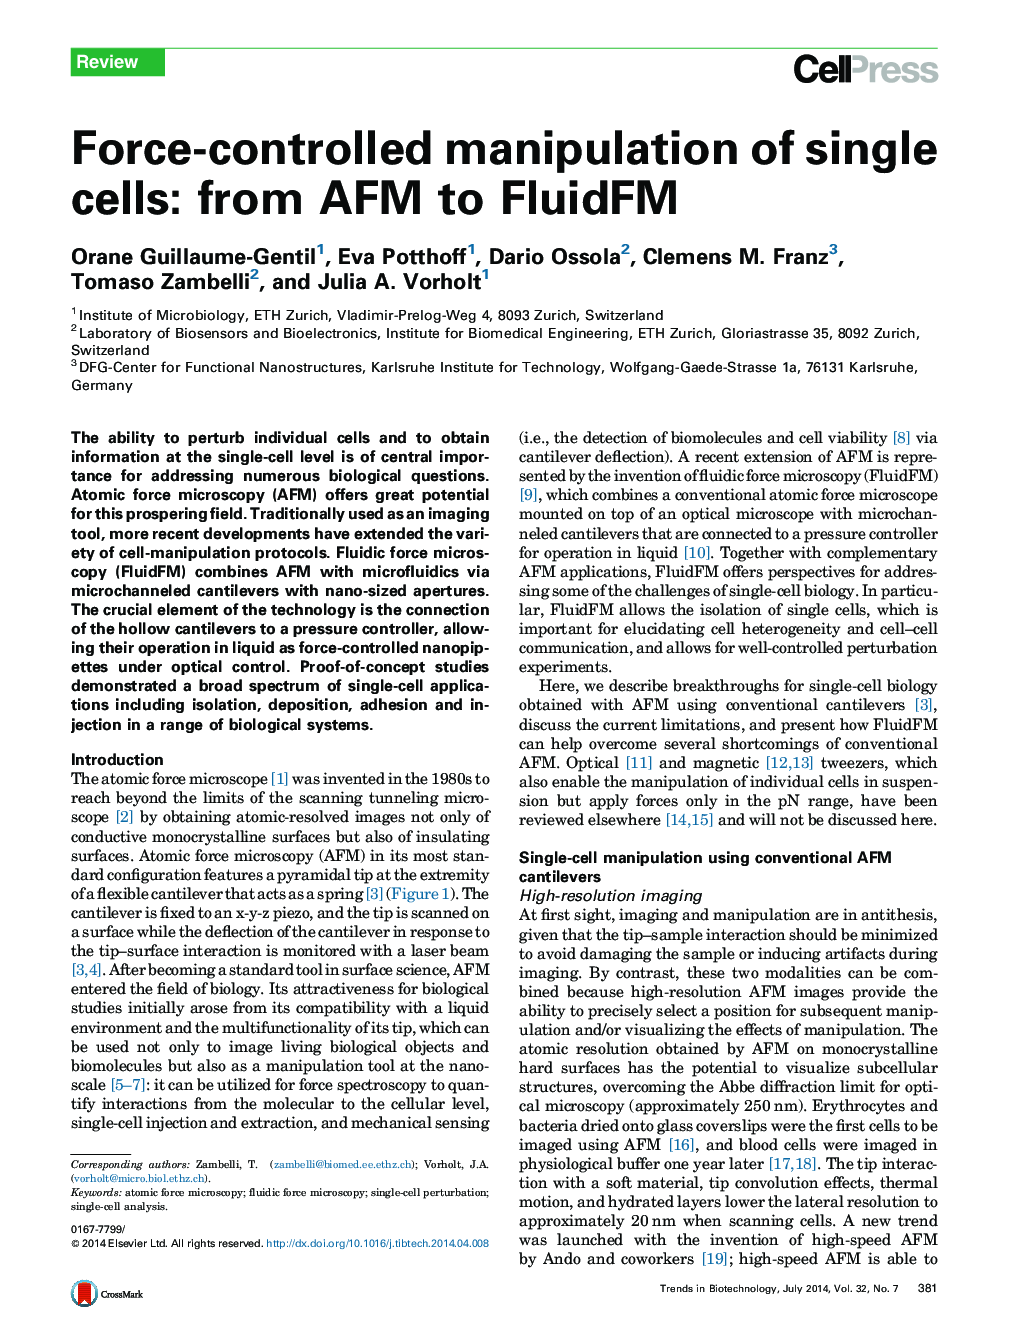 Force-controlled manipulation of single cells: from AFM to FluidFM